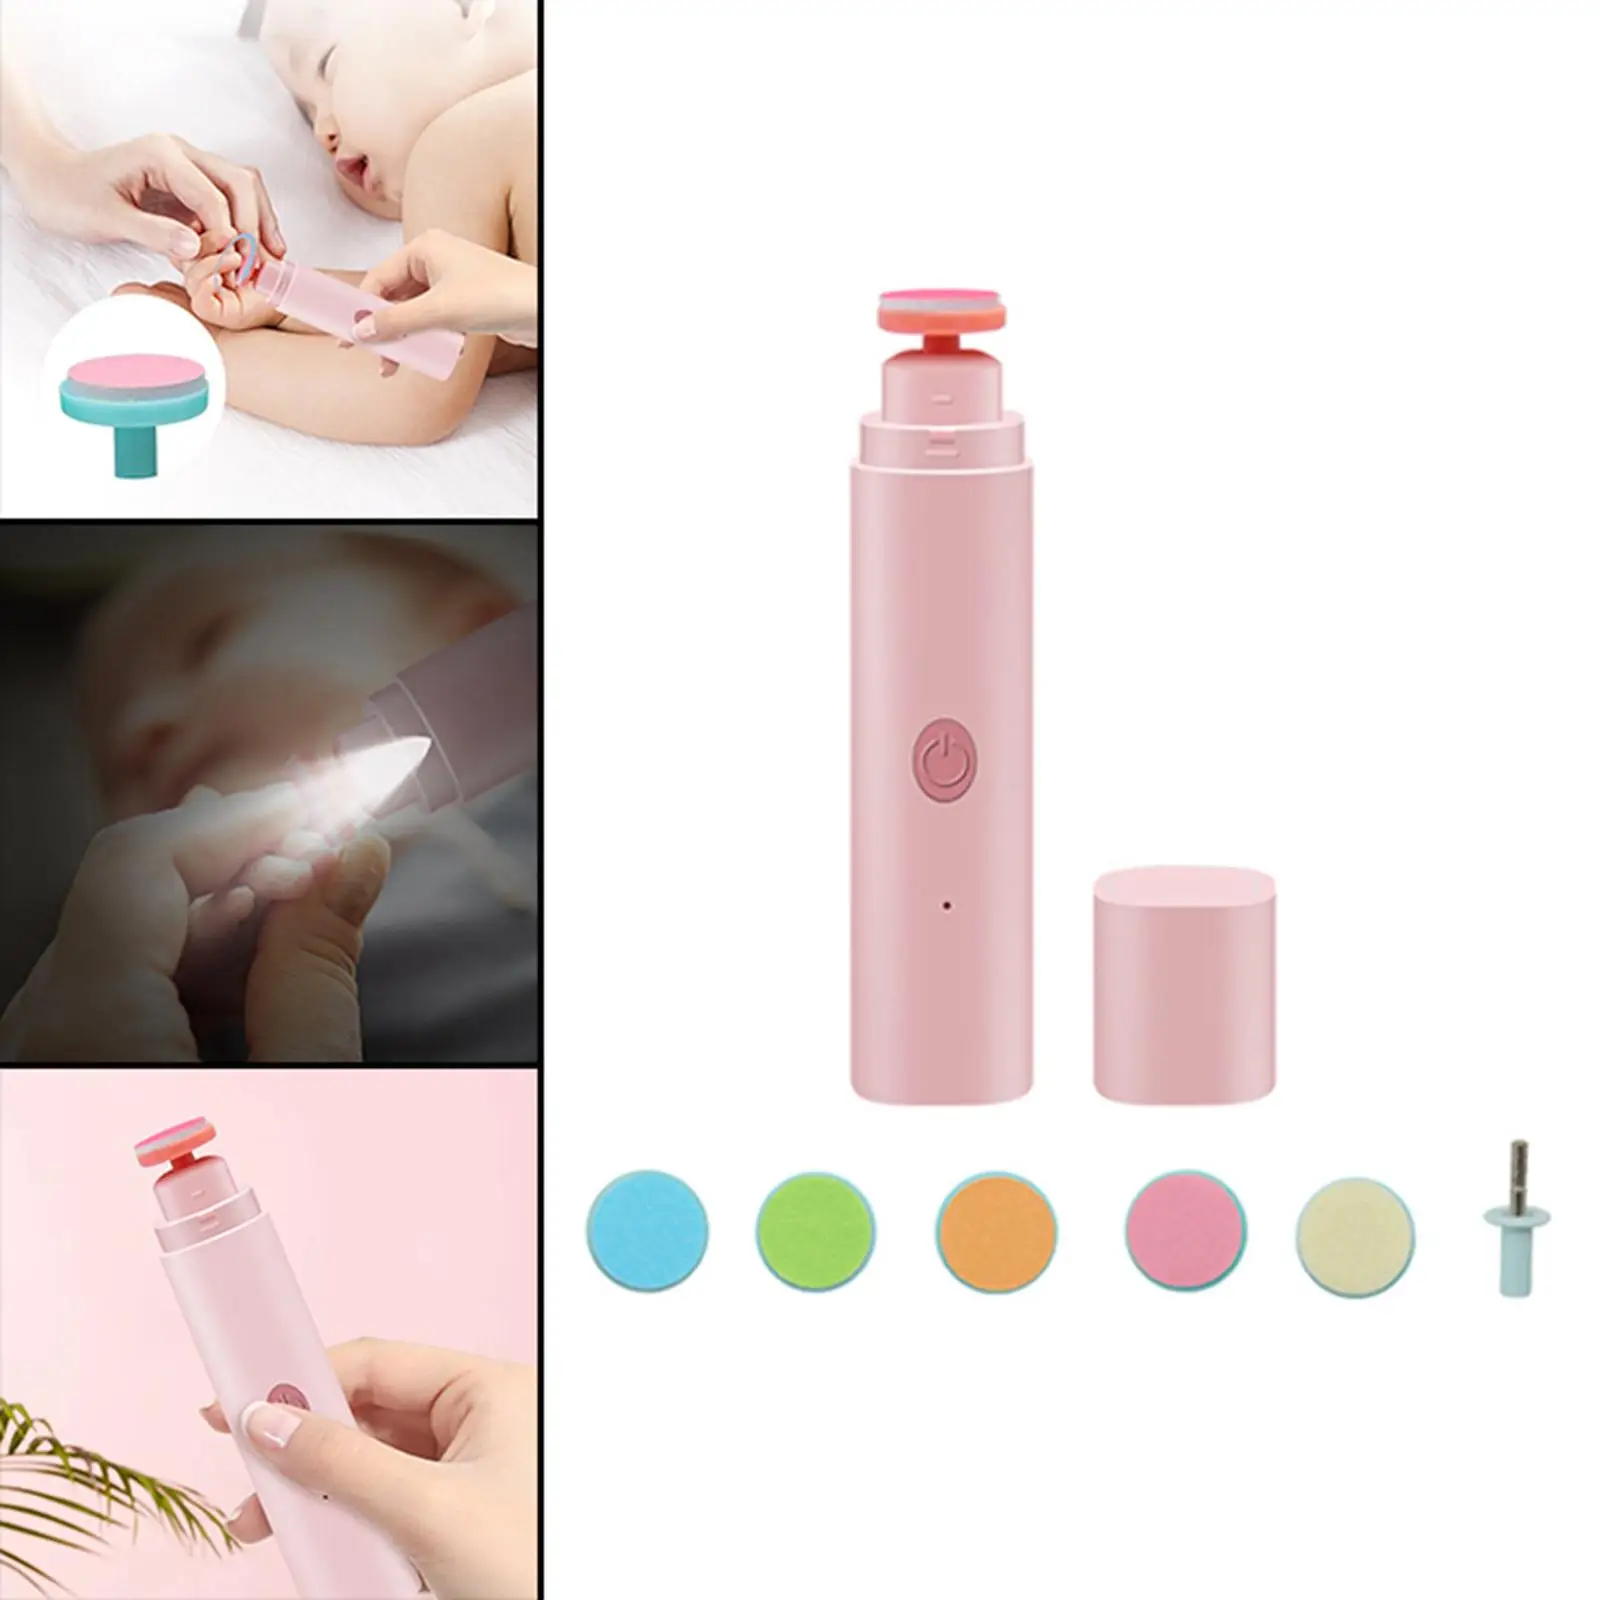 Electric Baby Nail File Drill Safety Trim Polish 6 Grinding Heads Grooming Manicure Care Clipper for Toes Fingernails Infant